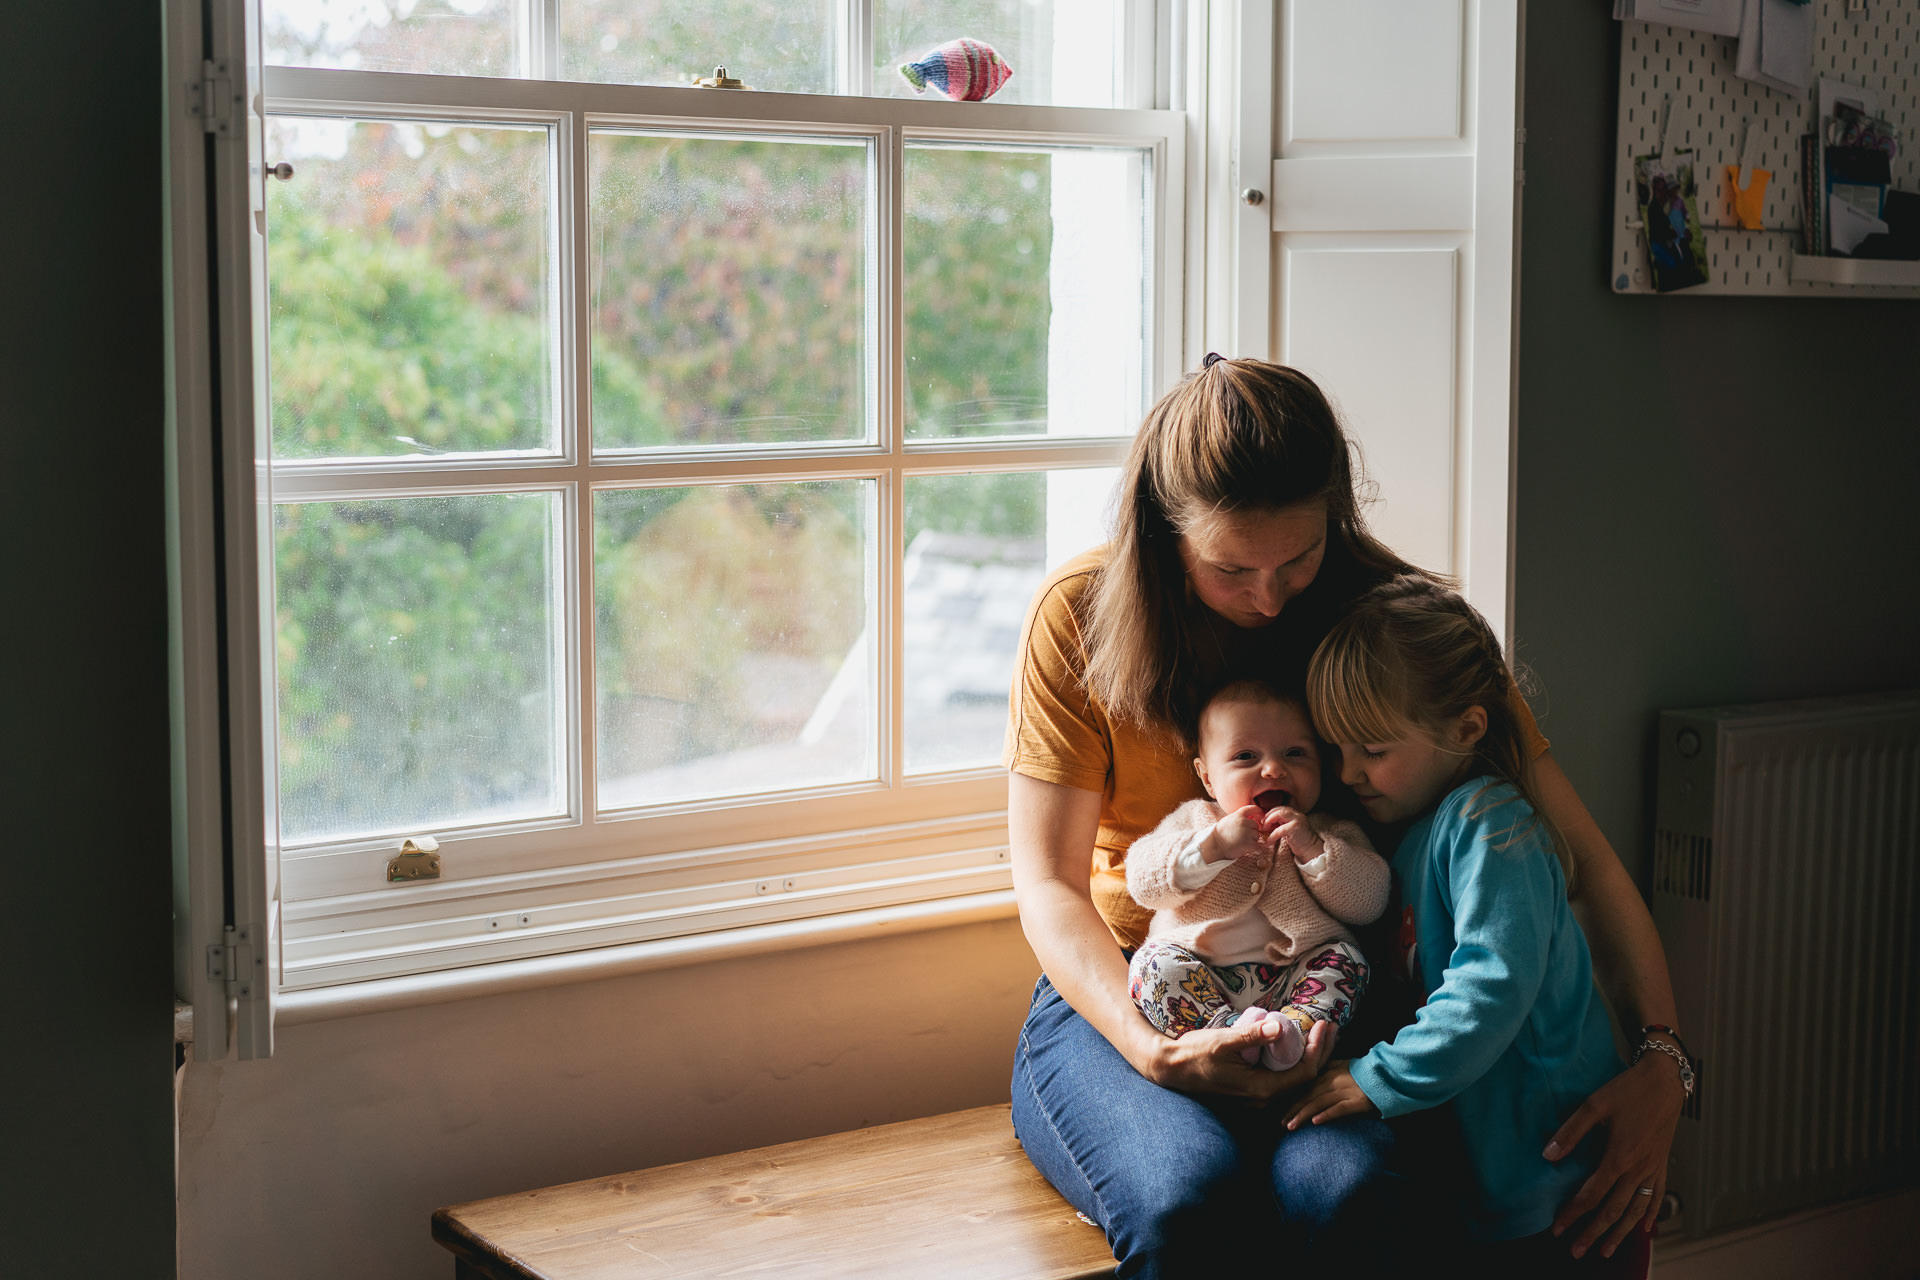 Exeter family photography: a mother with two young children sitting by a window